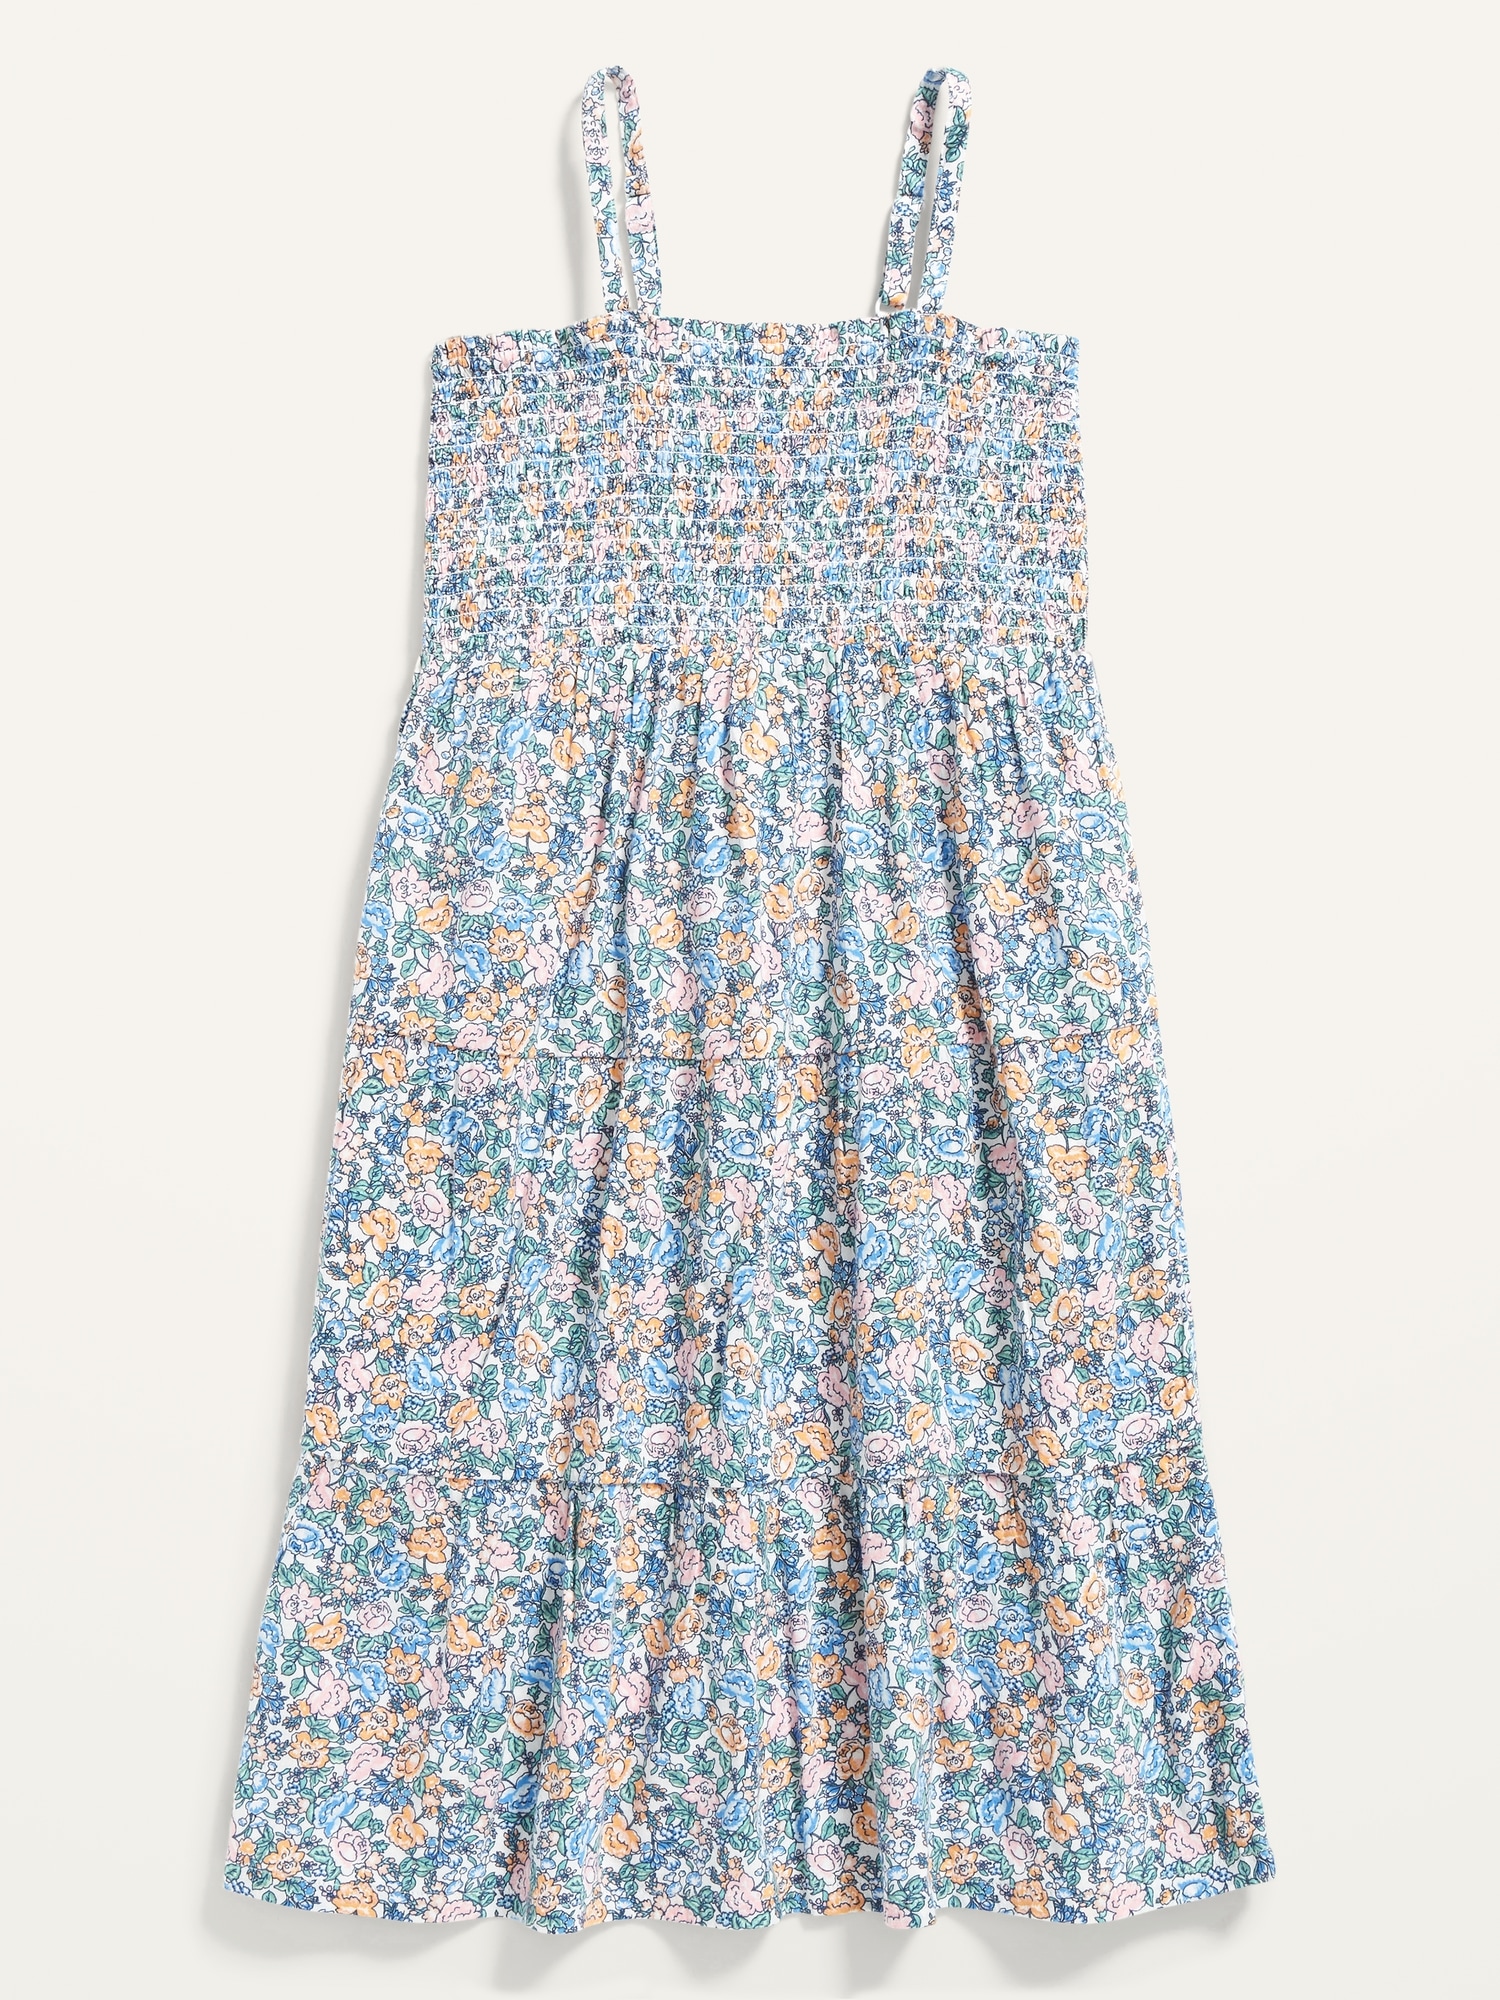 Floral Sleeveless Tiered Swing Dress for Girls | Old Navy